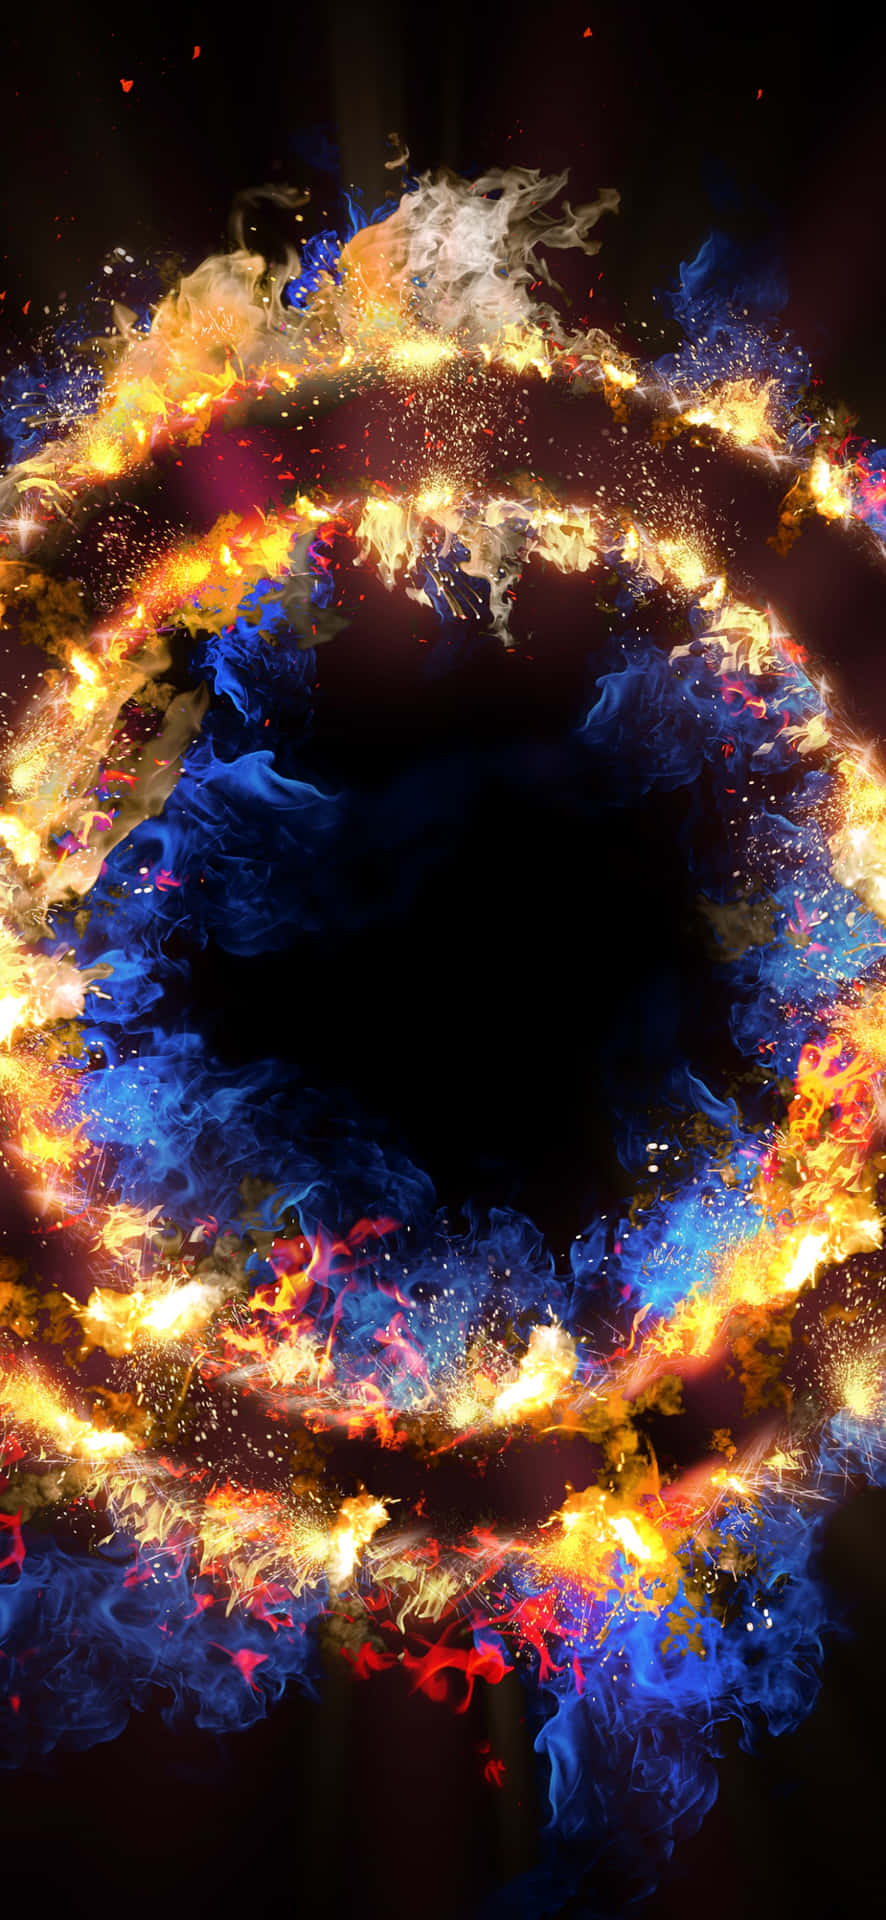 A Fire Ring With Blue And Orange Flames